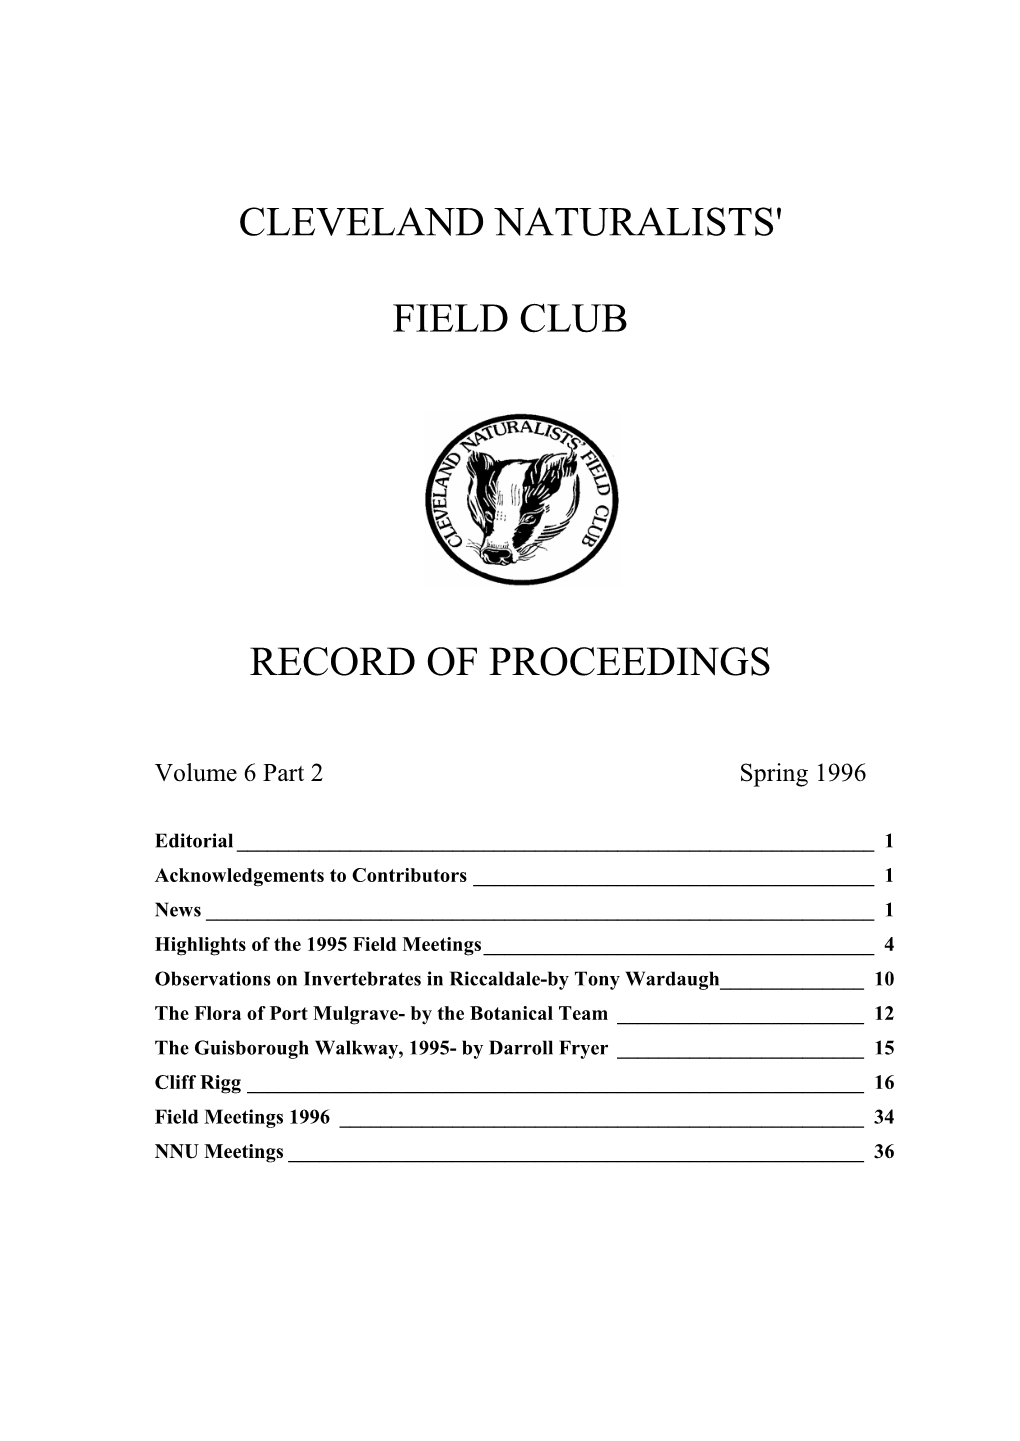 Cleveland Naturalists' Field Club Record of Proceedings